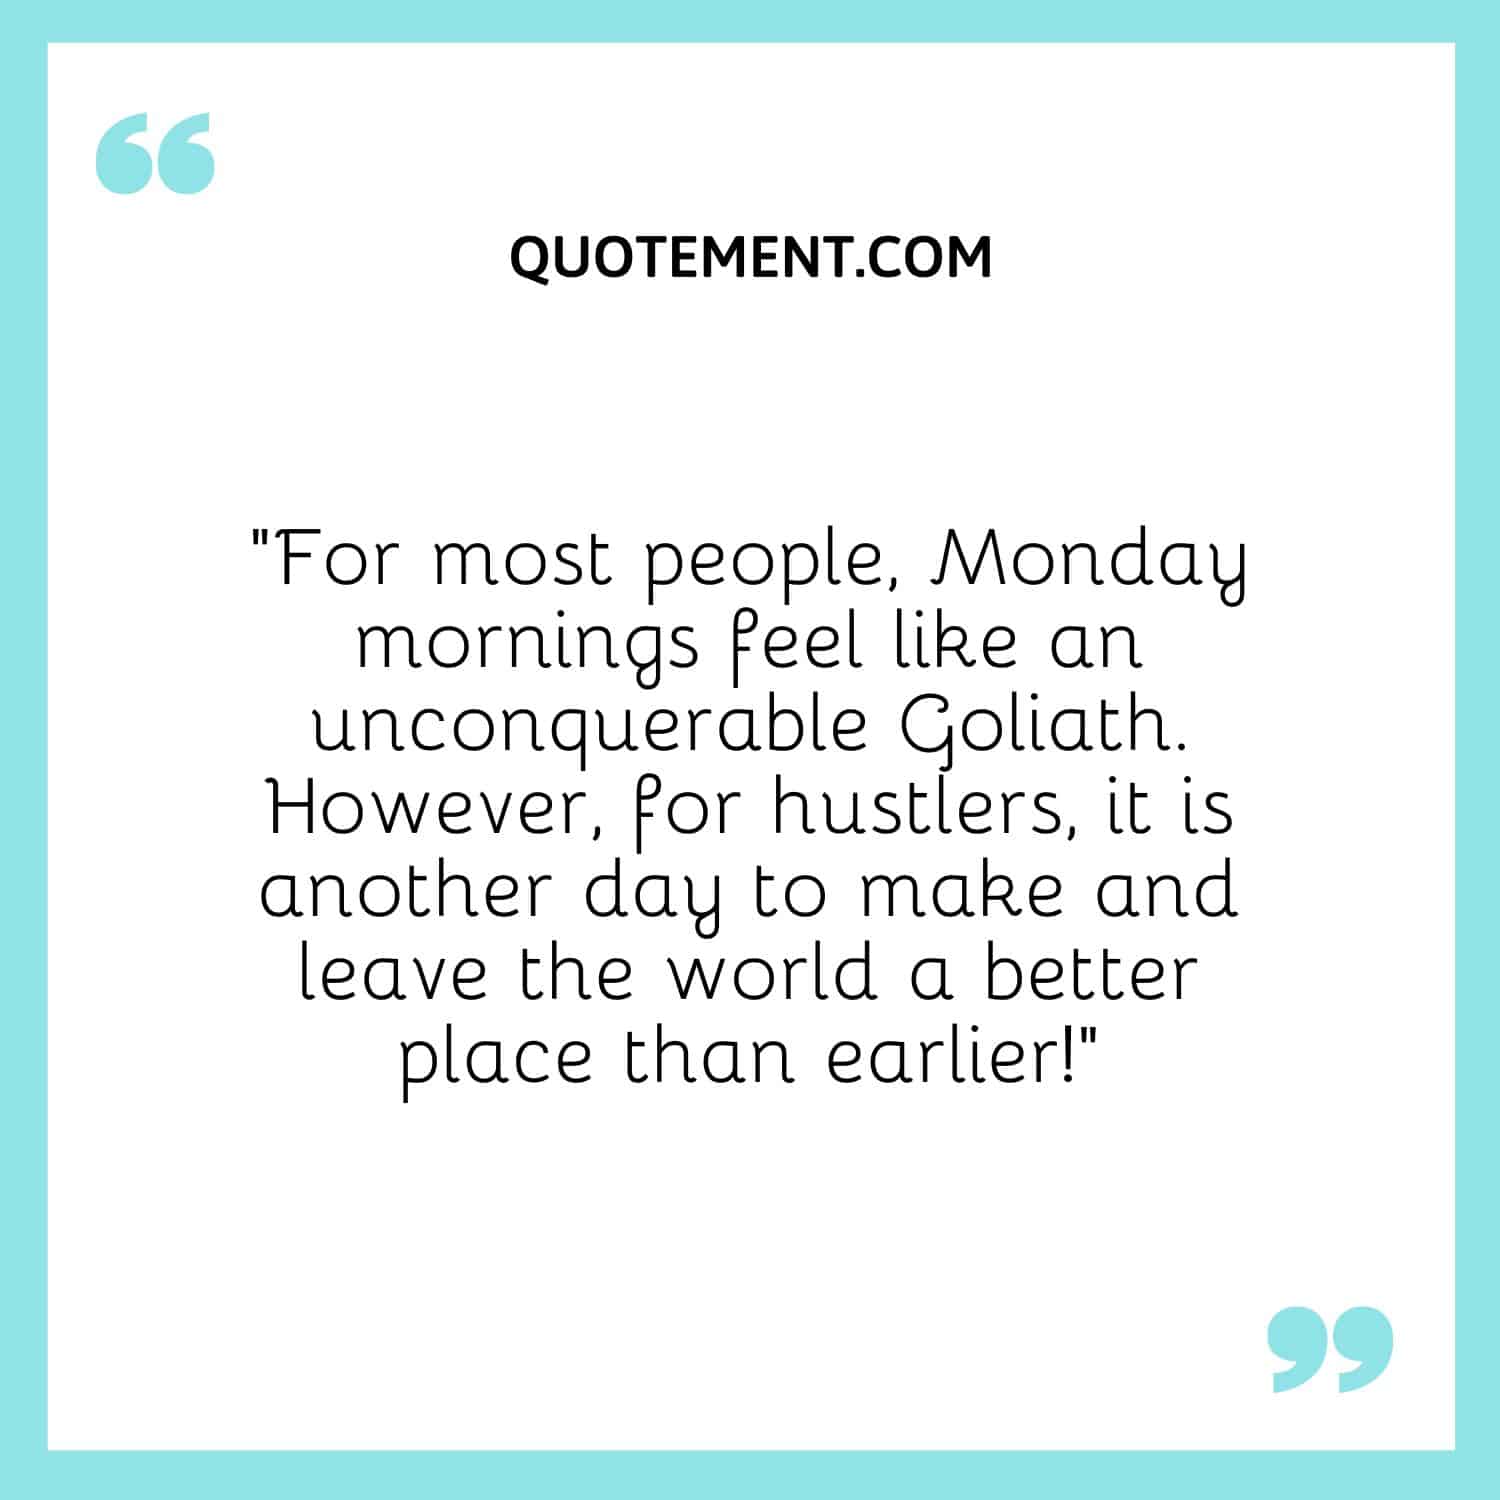 Monday mornings feel like an unconquerable Goliath